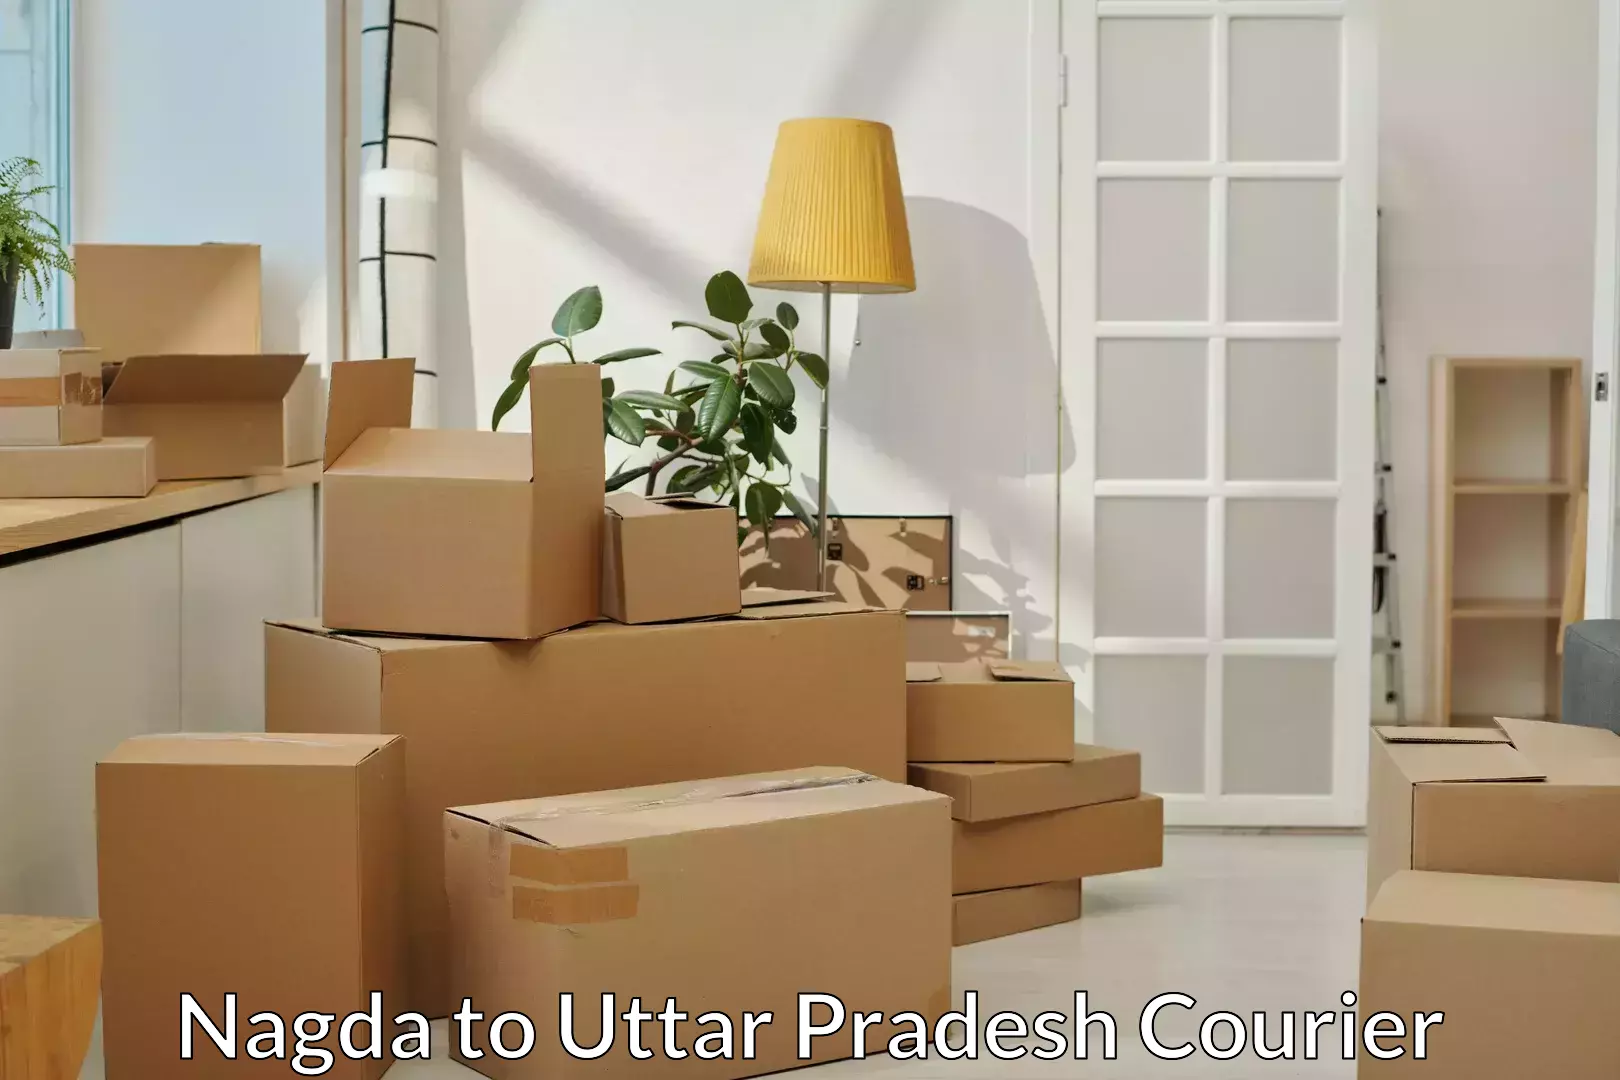 Professional movers and packers Nagda to Lucknow